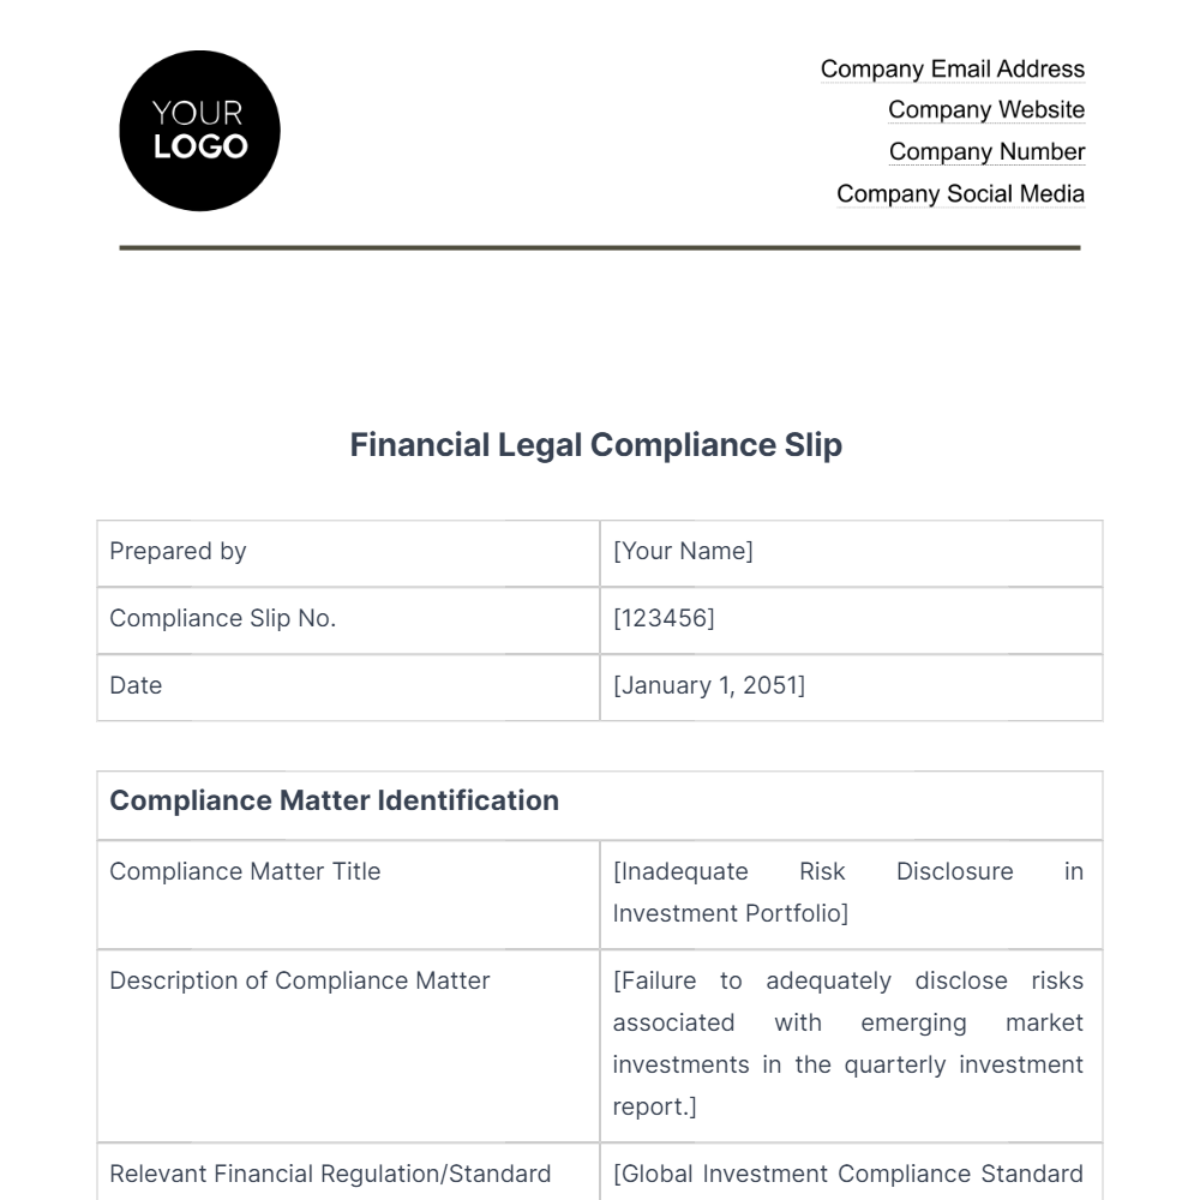 Free Financial Legal Compliance Slip Template